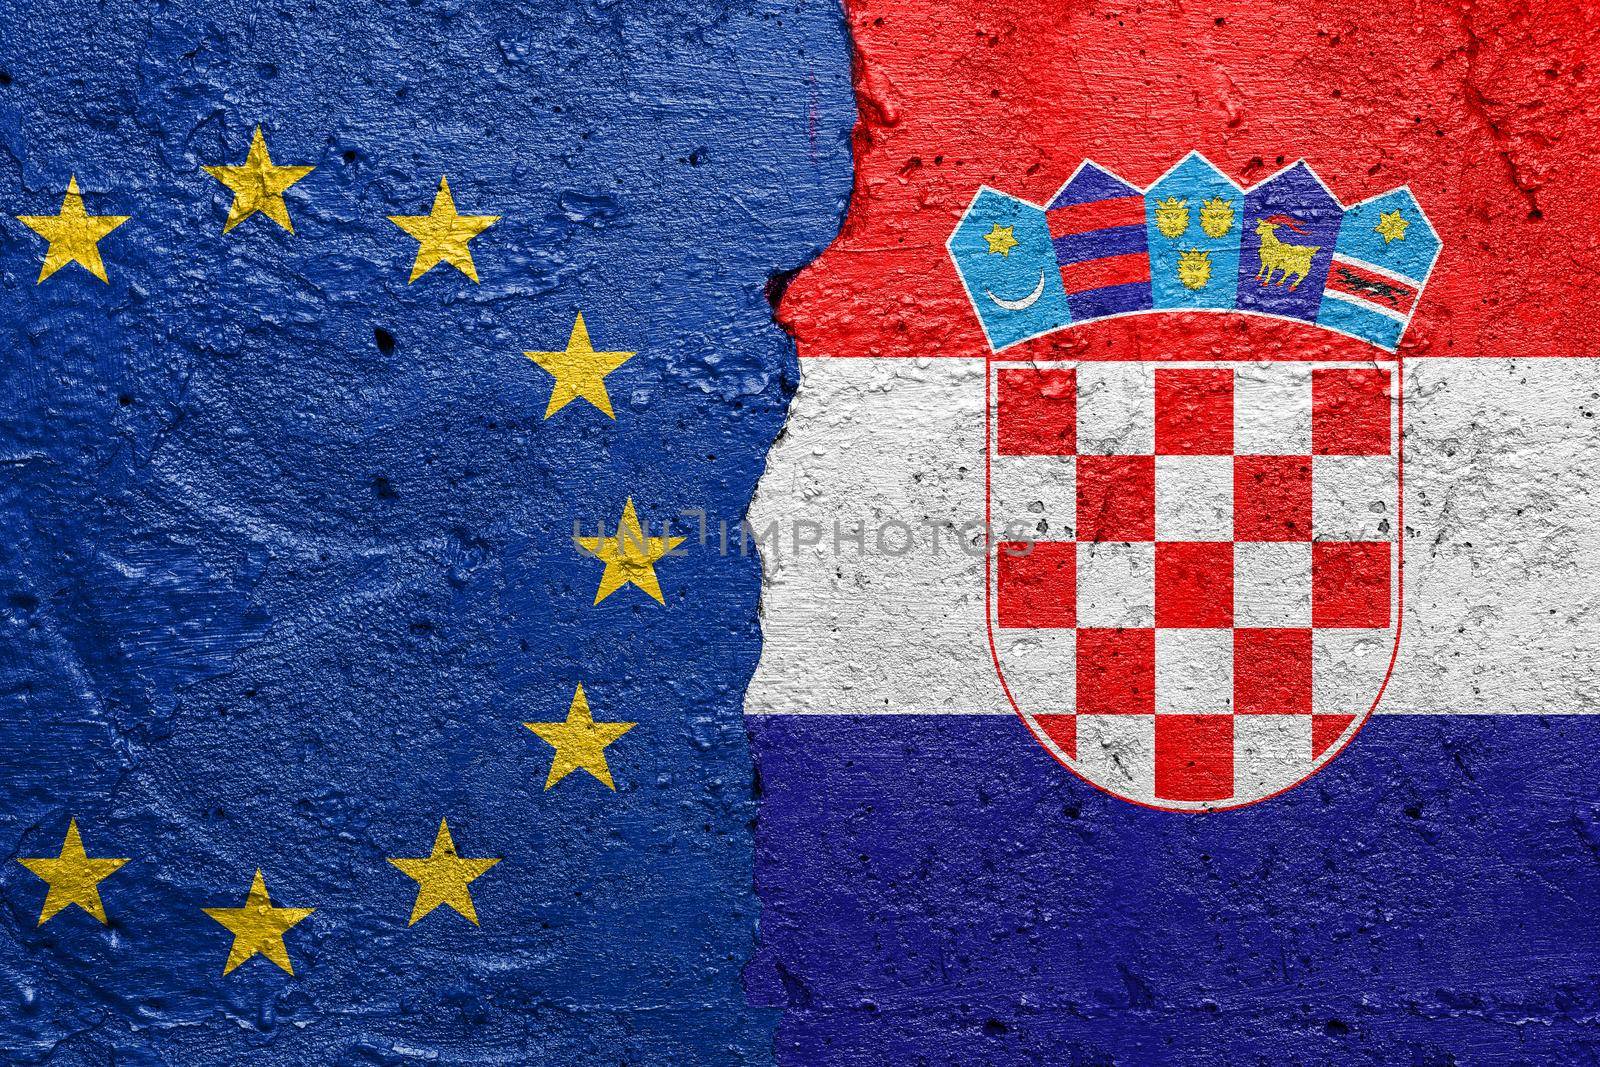 European Union EU and Croatia - Cracked concrete wall painted with a EU flag on the left and a Croatian flag on the right stock photo by adamr